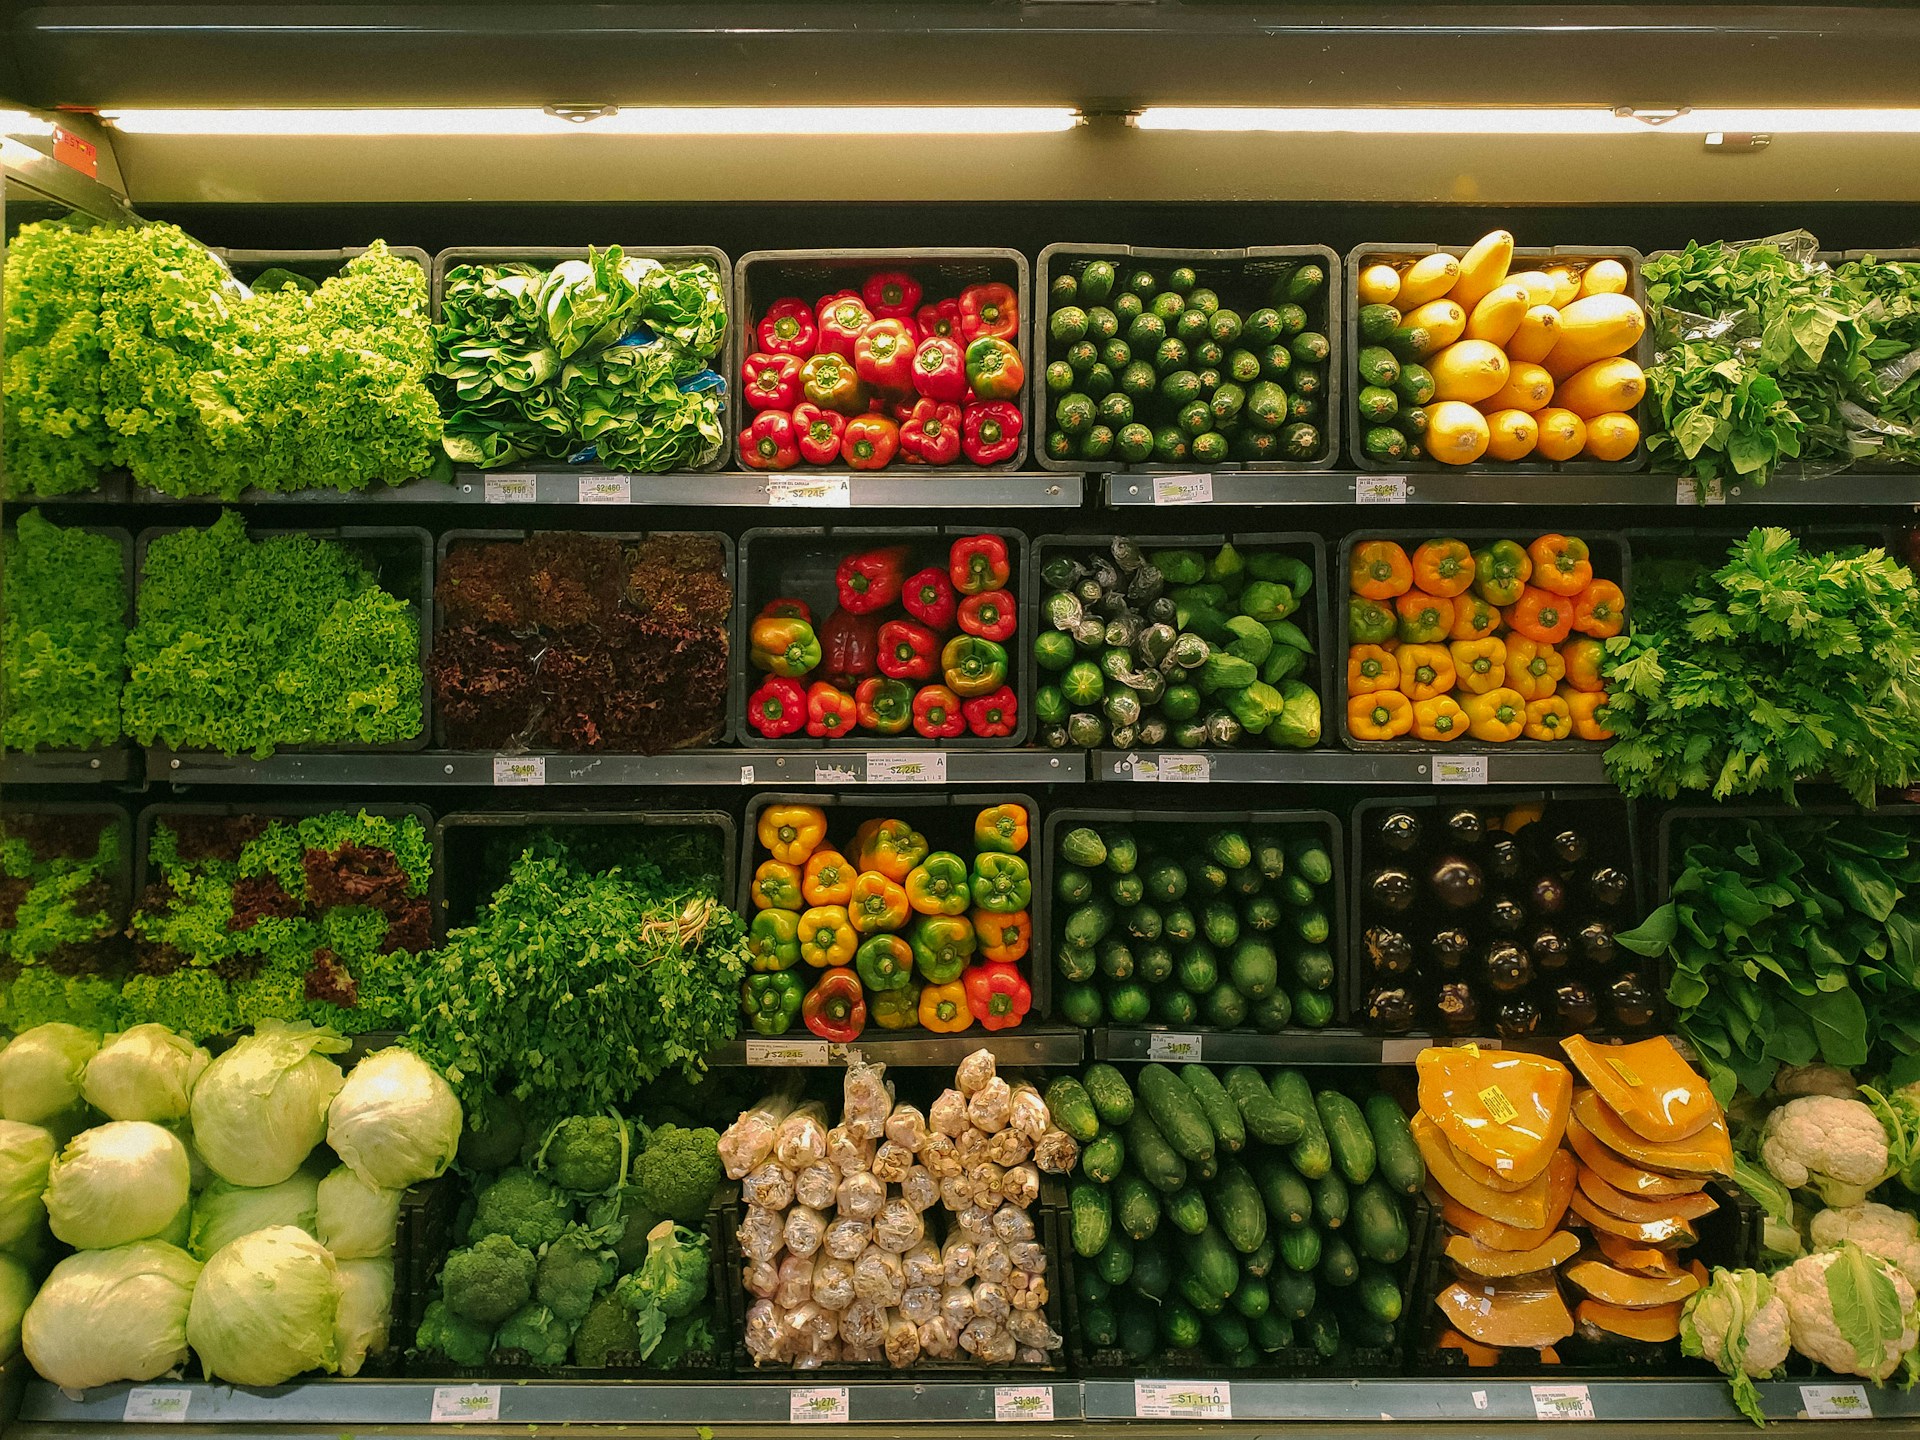 7 Cost-Effective Cold Chain Tips for Produce Distribution